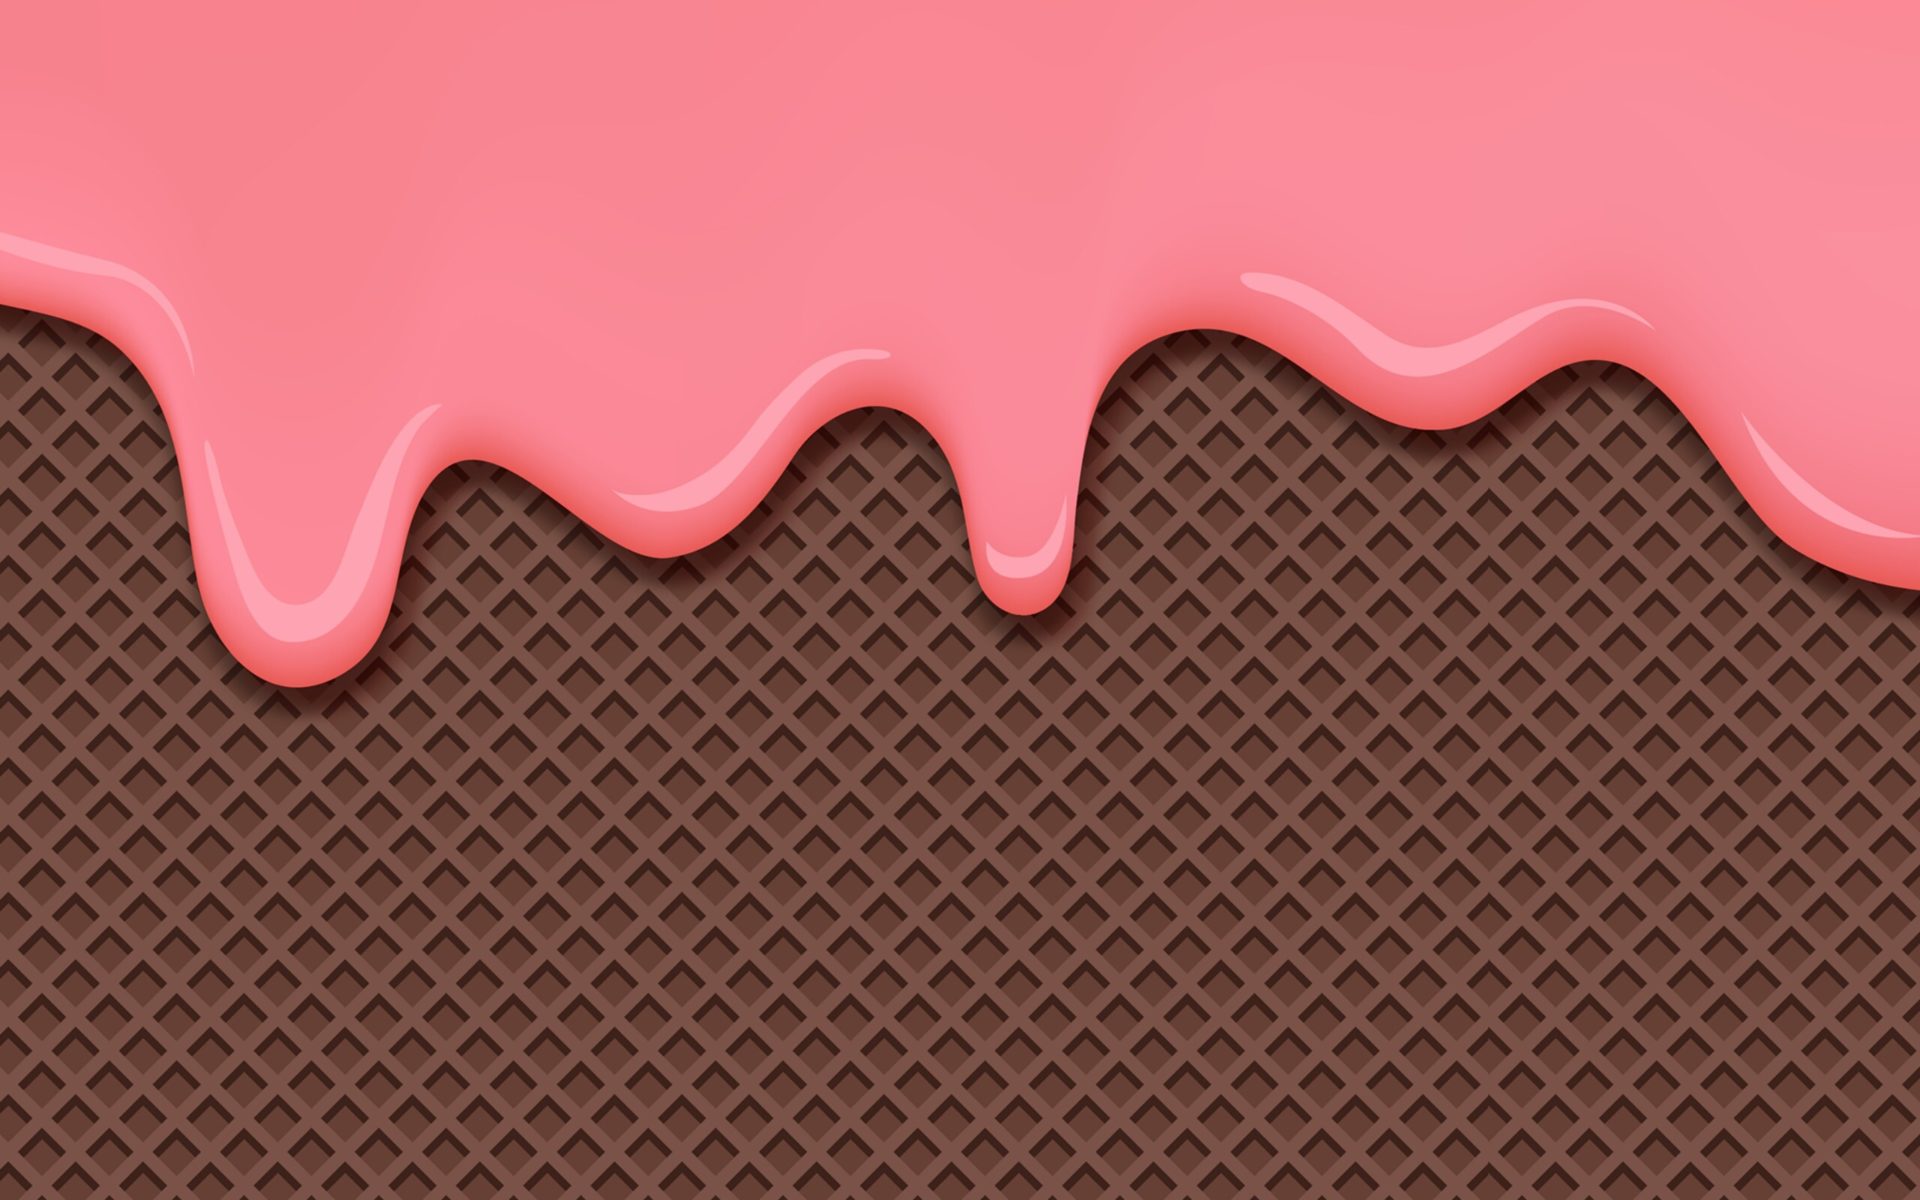 Melting Ice Cream Simple Wallpaper Designs HD Wallpapers Backgrounds Images